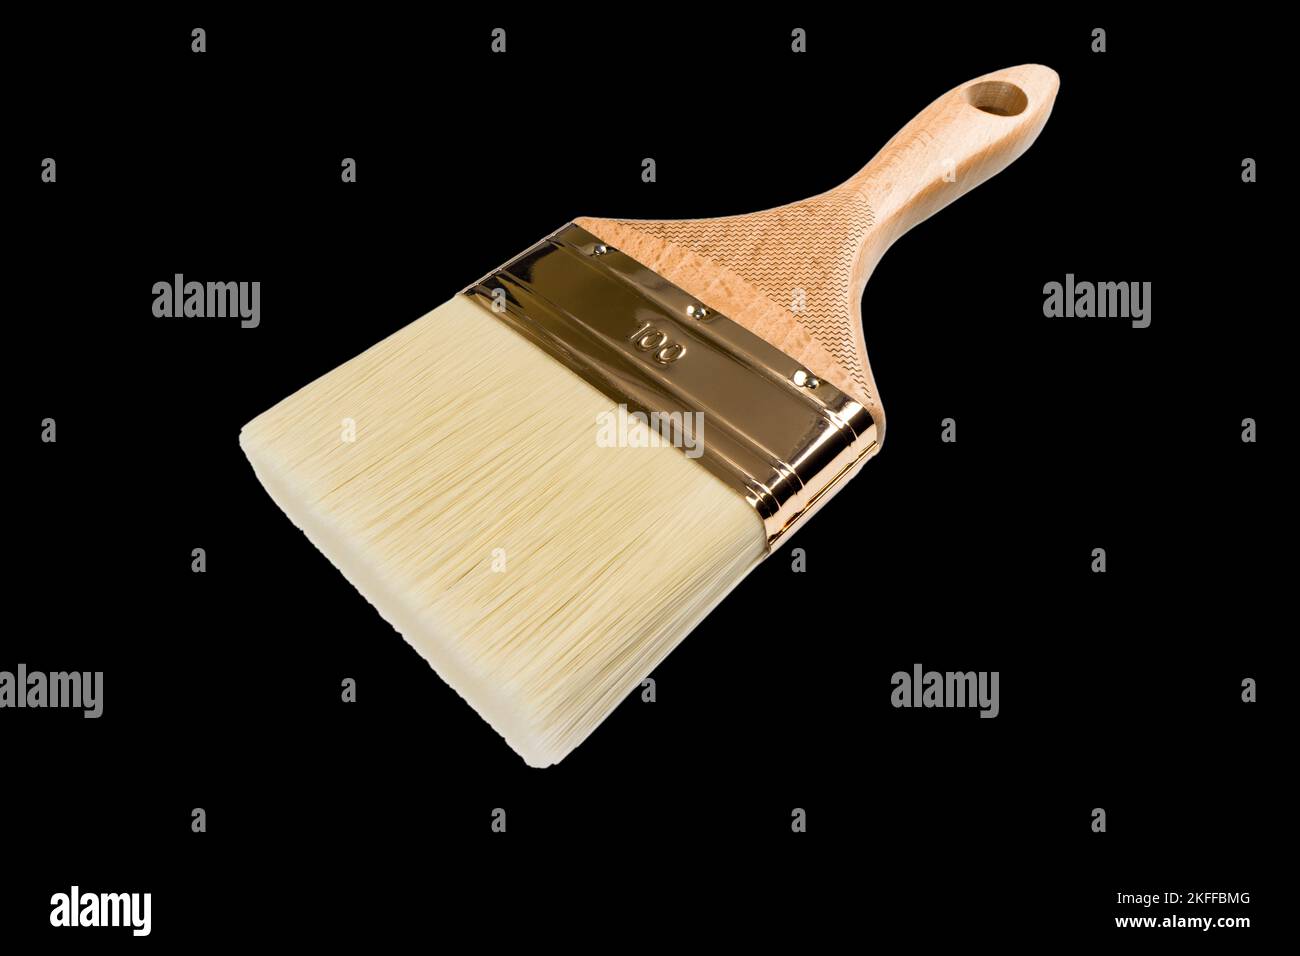 Clean new paint brush isolated on black background. Red handle paint brush isolated on black background Stock Photo